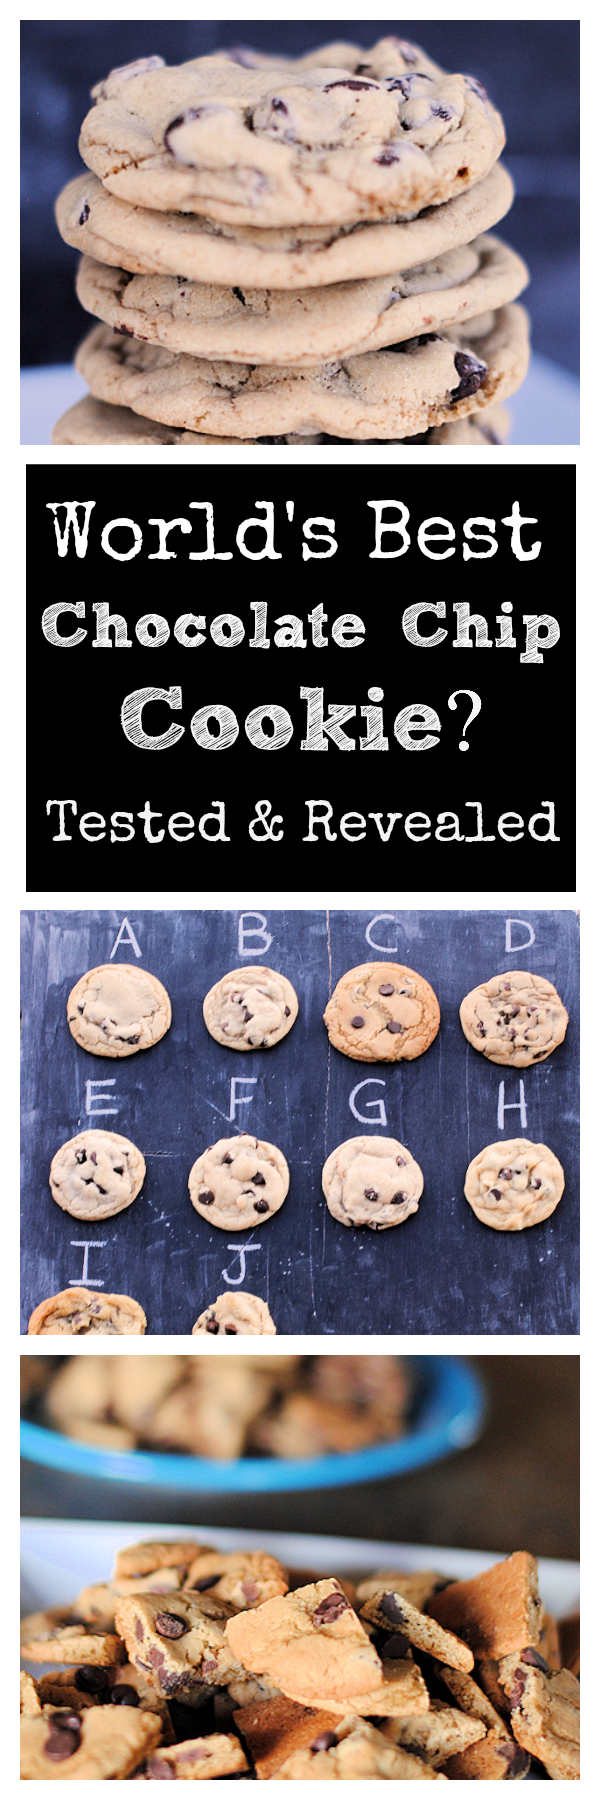 10 Recipes that Claim to be the Best Chocolate Chip Cookies Ever-Put to the test by 40+ taste testers. Find out which was really the best!